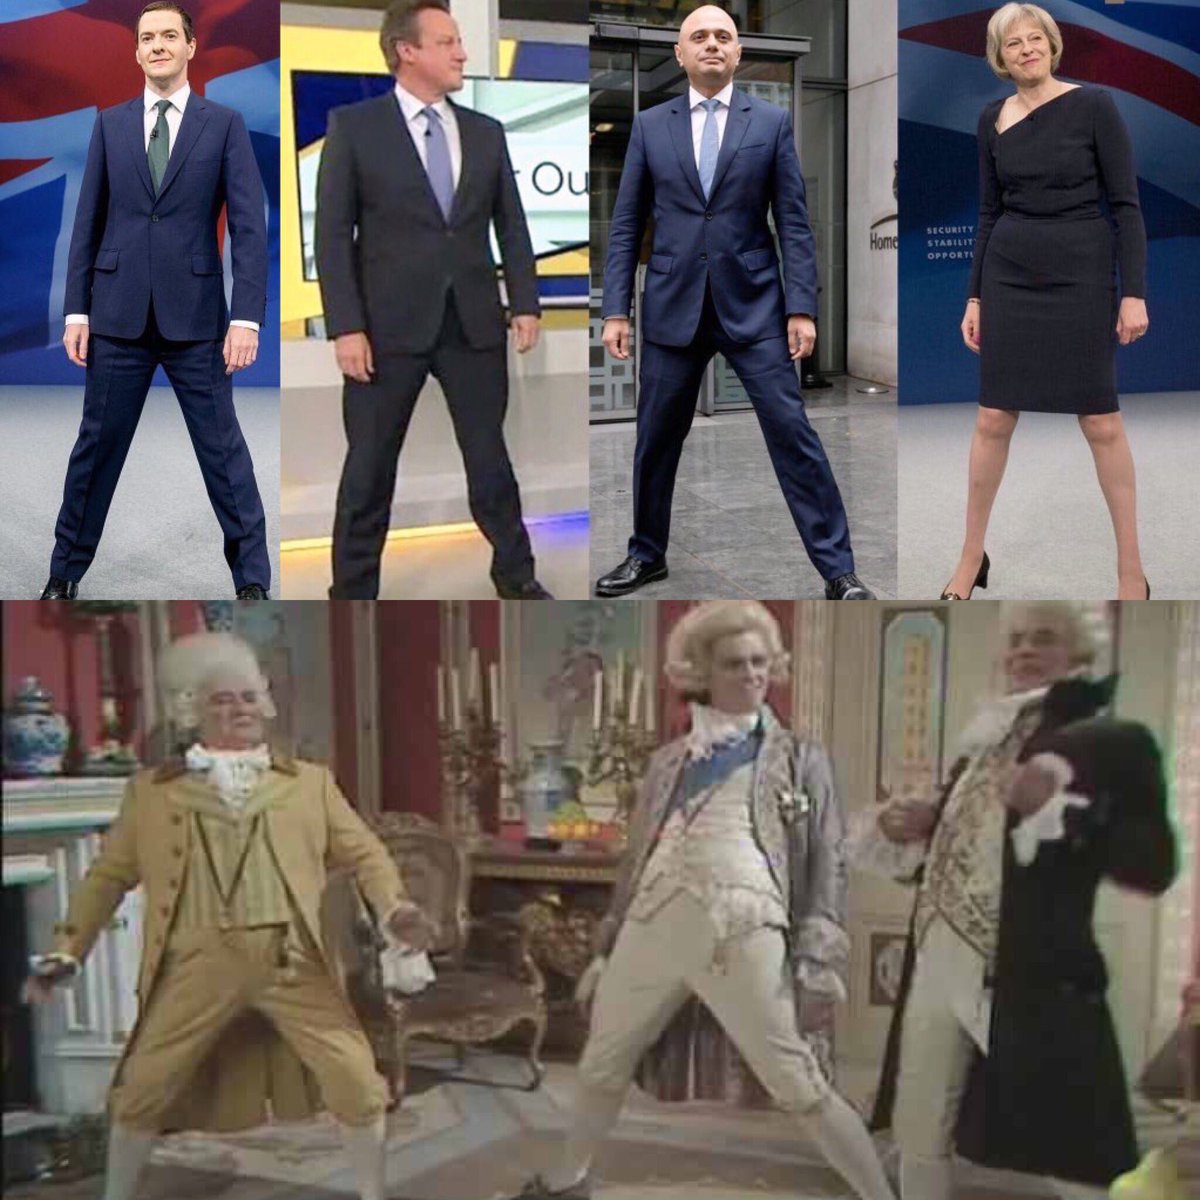 It looks suspiciously like Blackadder has given body language lessons to the Tories.